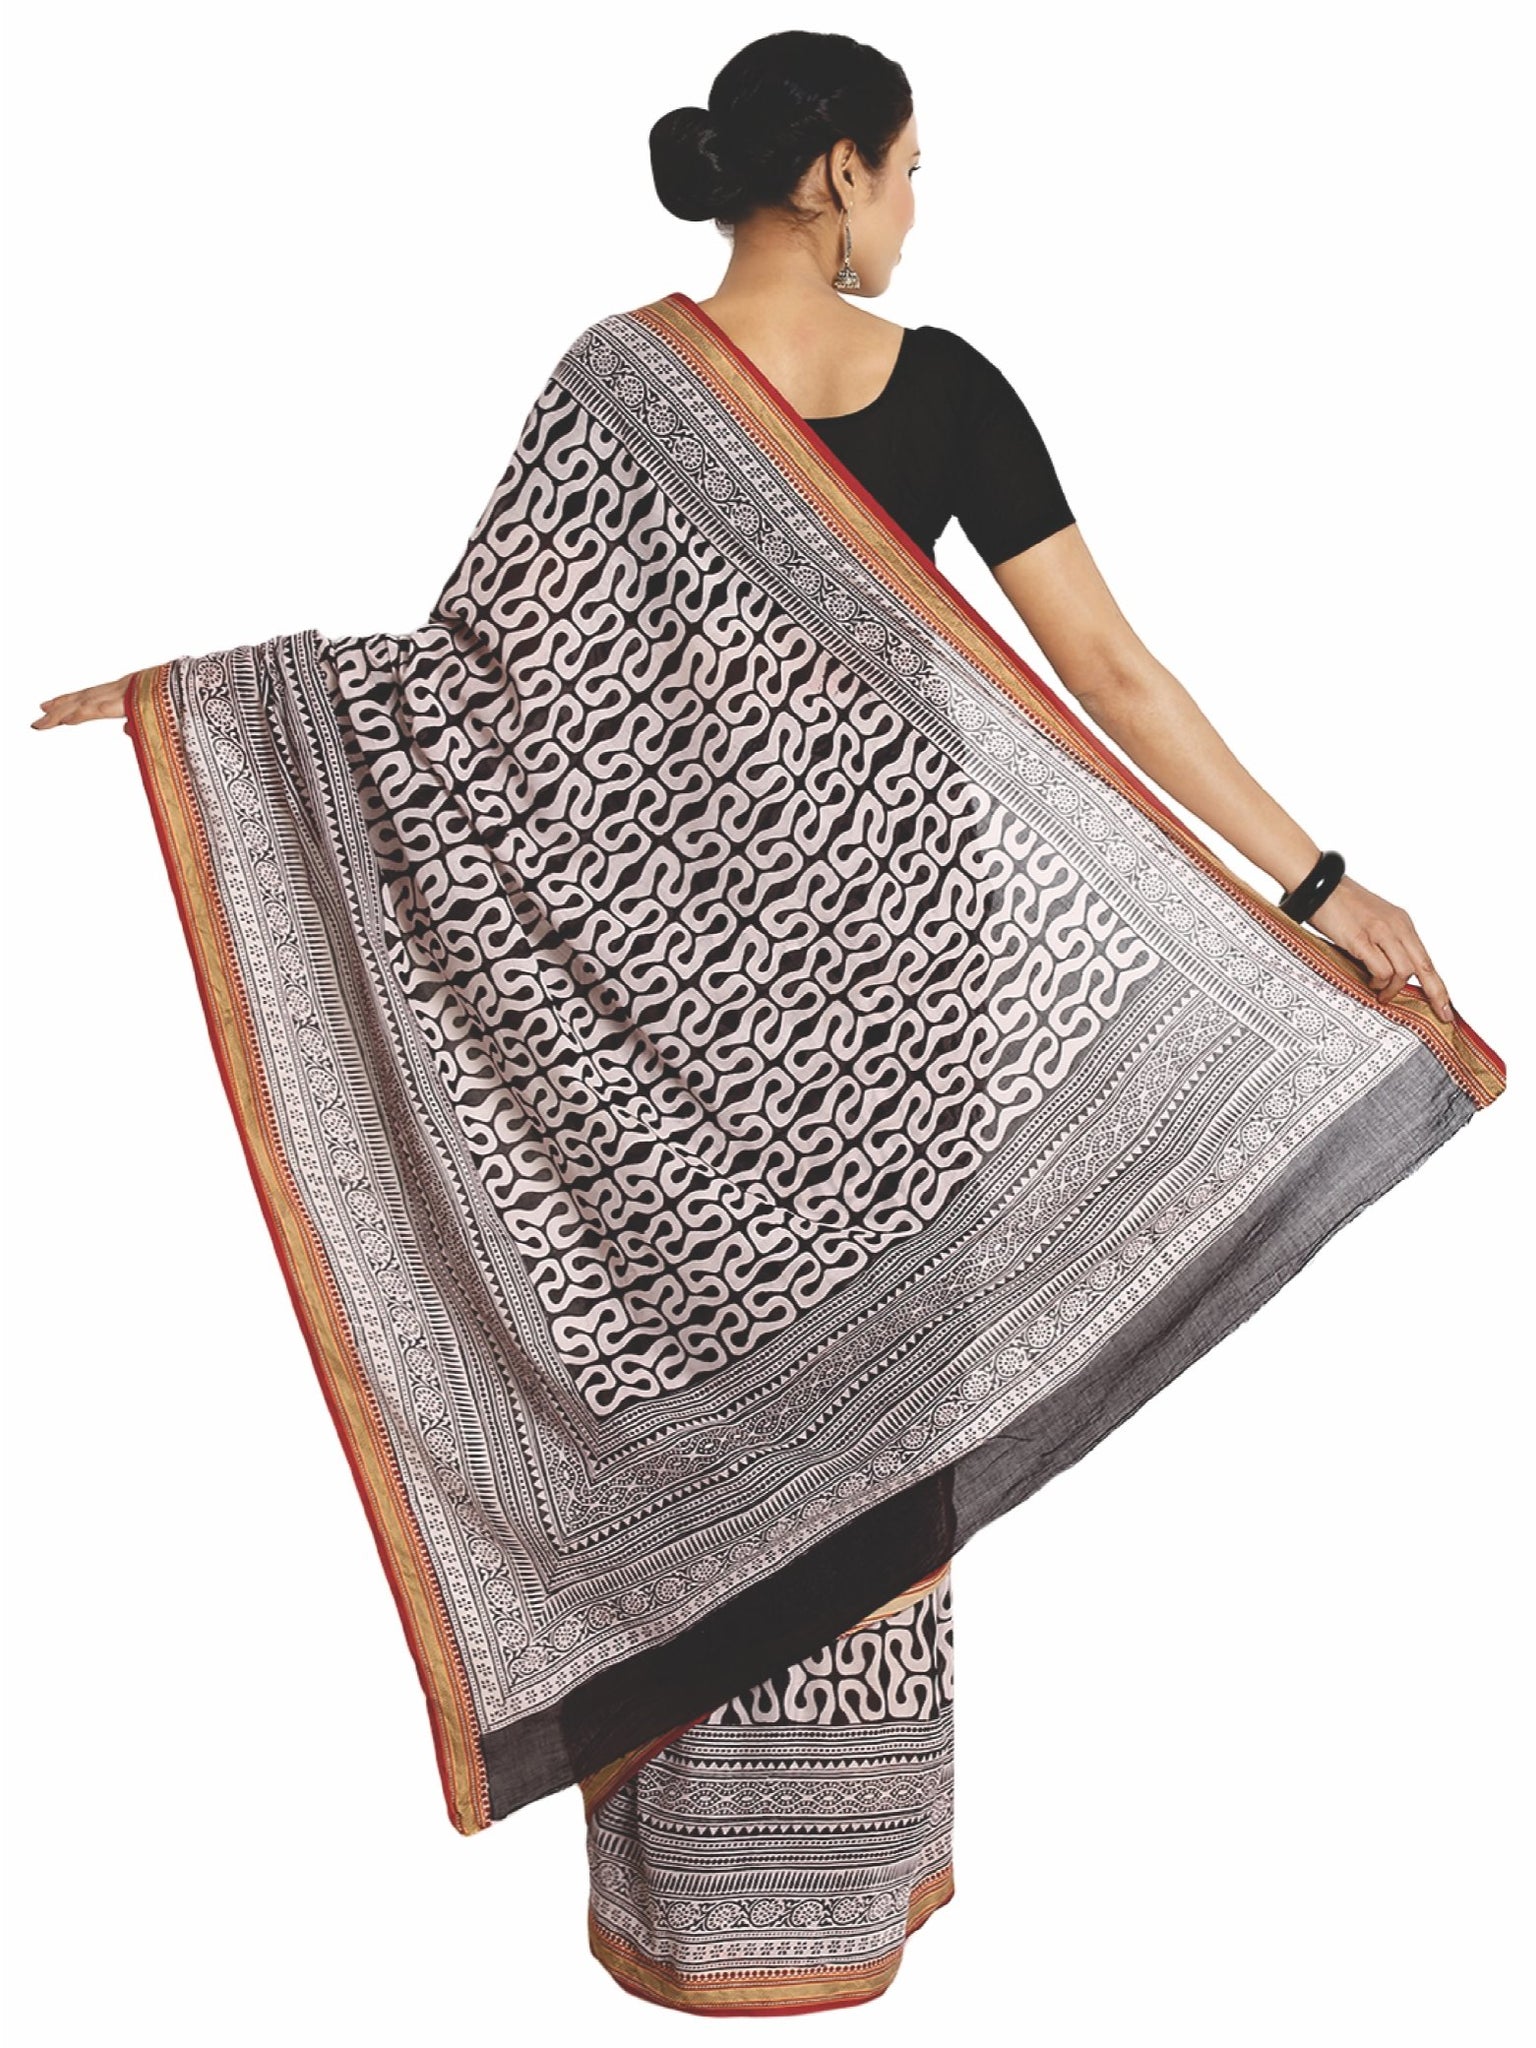 Off-White & Black Cotton Hand Block Bagh Print Handcrafted Saree-Saree-Kalakari India-ZIBASA0043-Bagh, Cotton, Geographical Indication, Hand Blocks, Hand Crafted, Heritage Prints, Natural Dyes, Sarees, Sustainable Fabrics-[Linen,Ethnic,wear,Fashionista,Handloom,Handicraft,Indigo,blockprint,block,print,Cotton,Chanderi,Blue, latest,classy,party,bollywood,trendy,summer,style,traditional,formal,elegant,unique,style,hand,block,print, dabu,booti,gift,present,glamorous,affordable,collectible,Sari,Saree